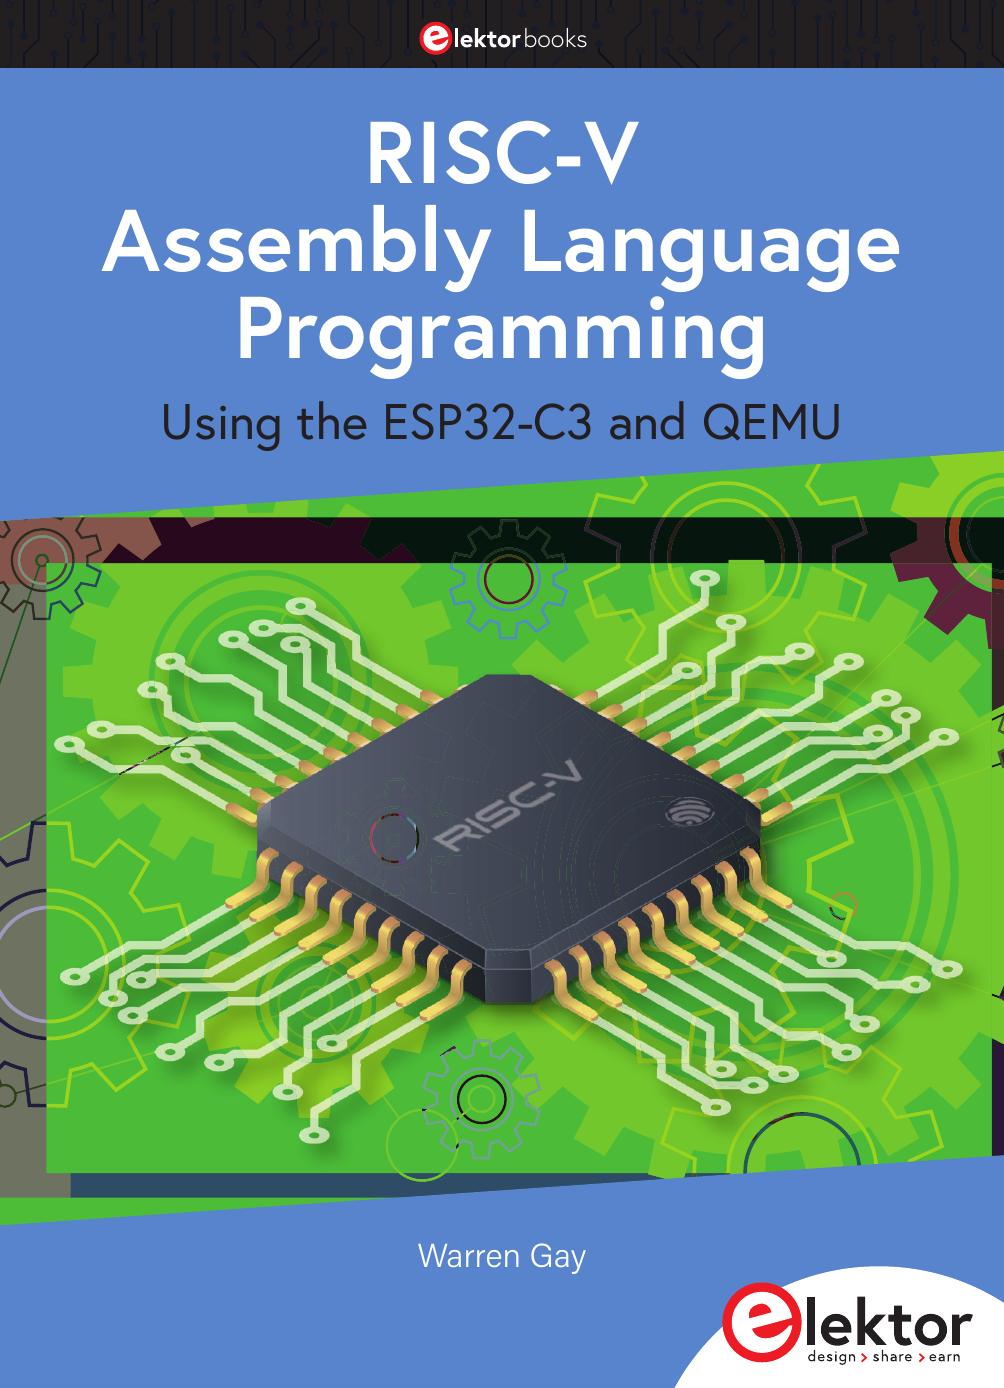 RISC-V Assembly Language Programming. Using ESP32-C3 and QEMU by Warren Gay